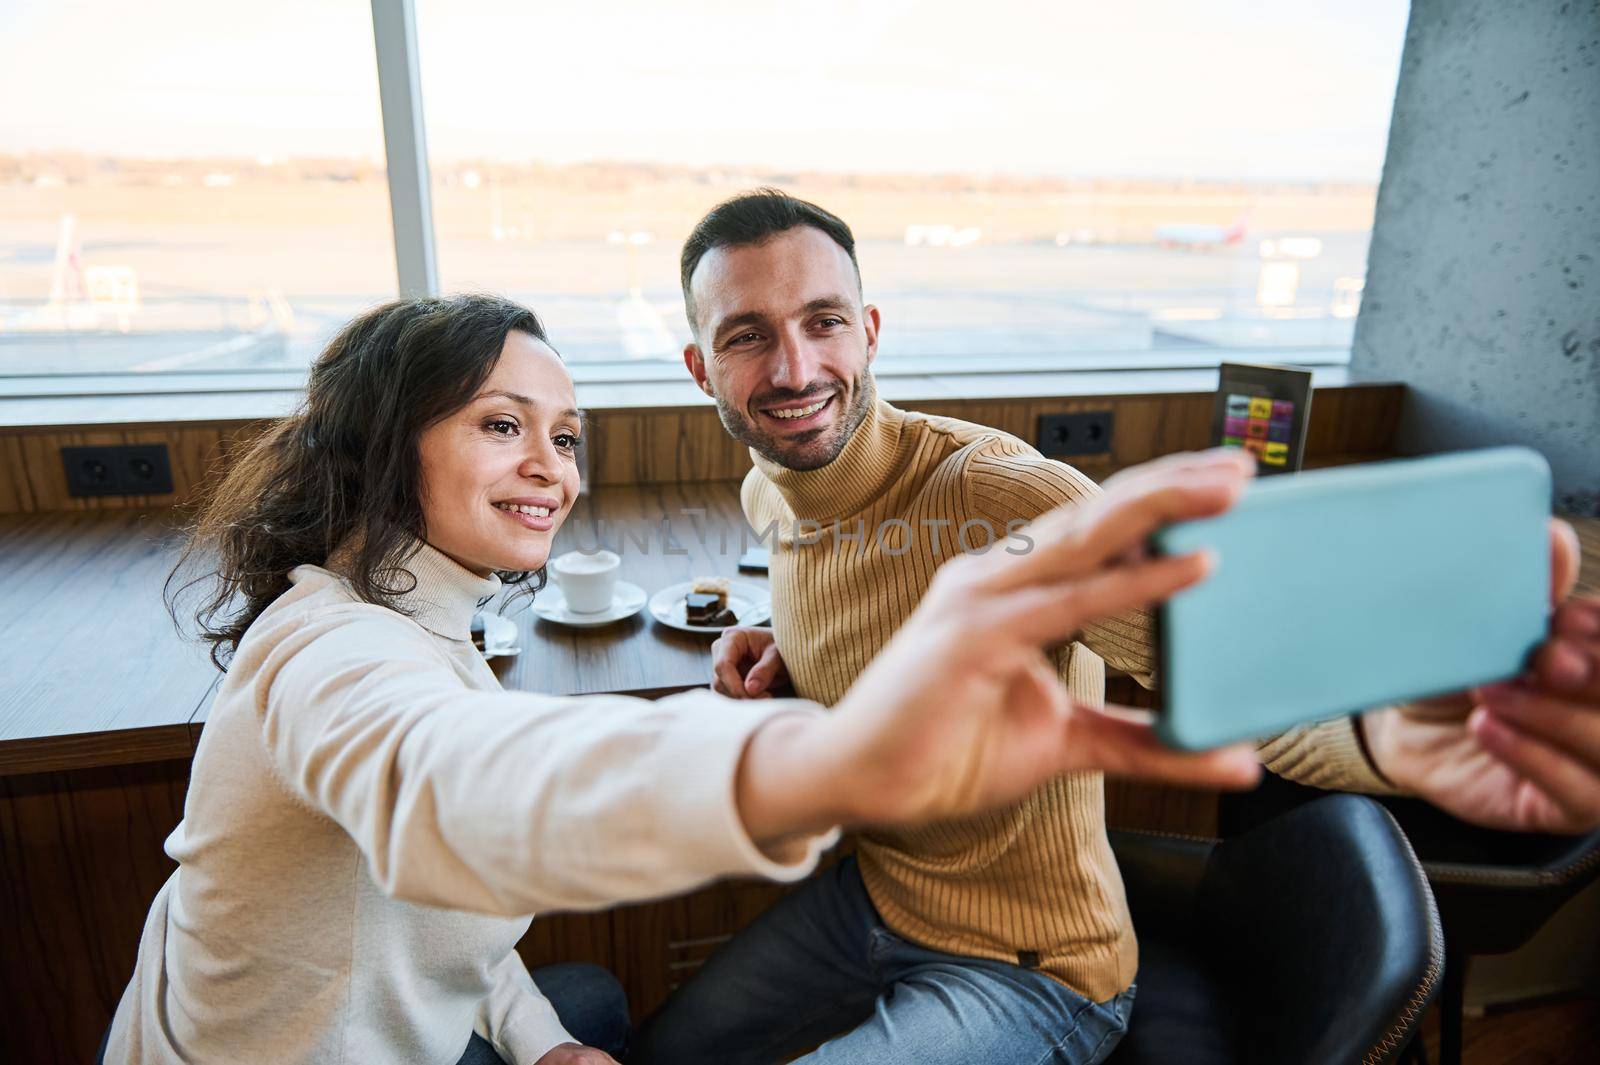 Beautiful multi-ethnic couple in love holding smartphone in outstretched hands and taking self-portrait while enjoying breakfast together in the airport departure terminal before boarding the flight